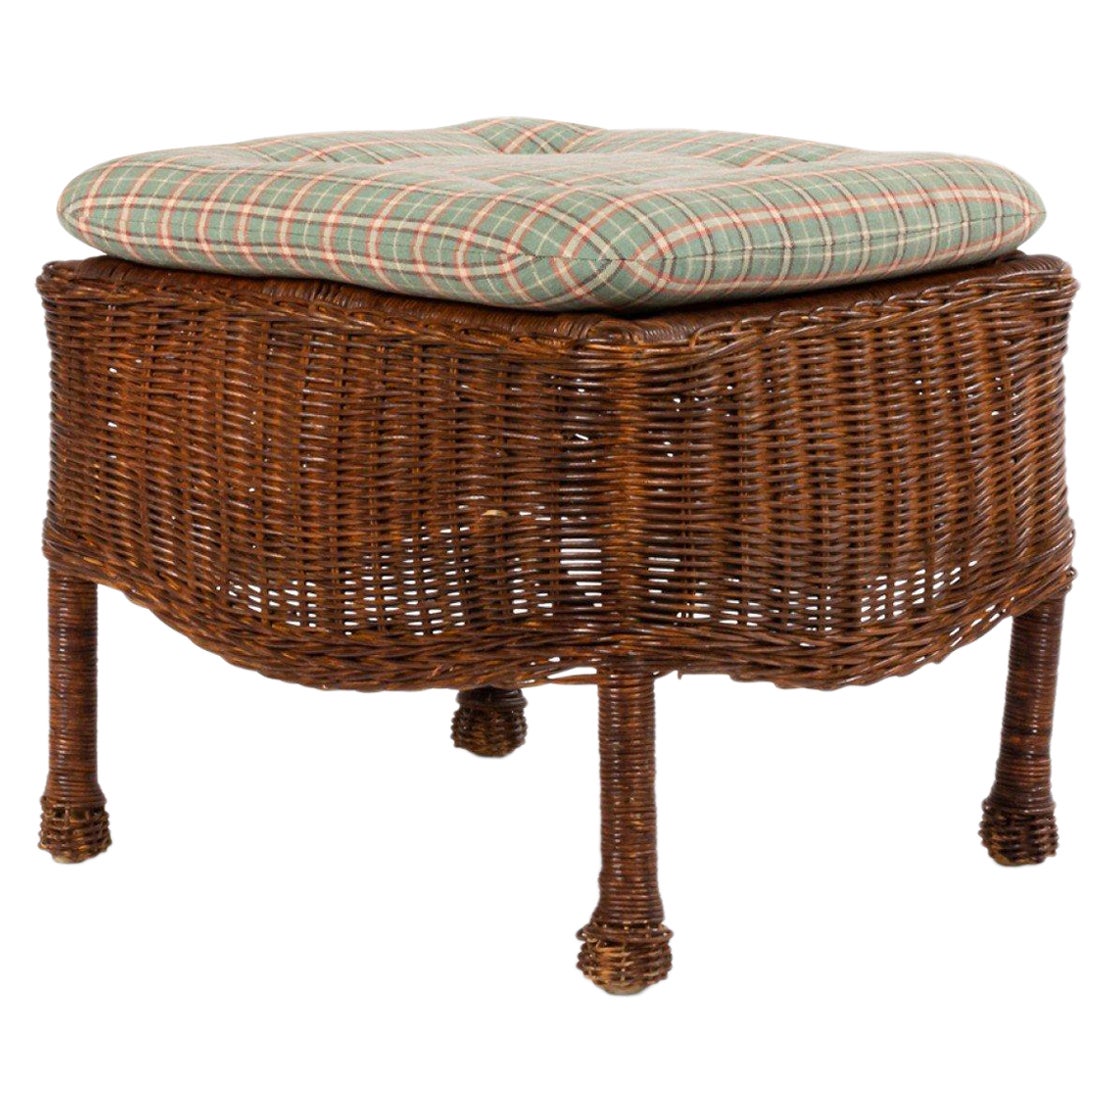 American Mission Style Wicker and Cushioned Ottoman